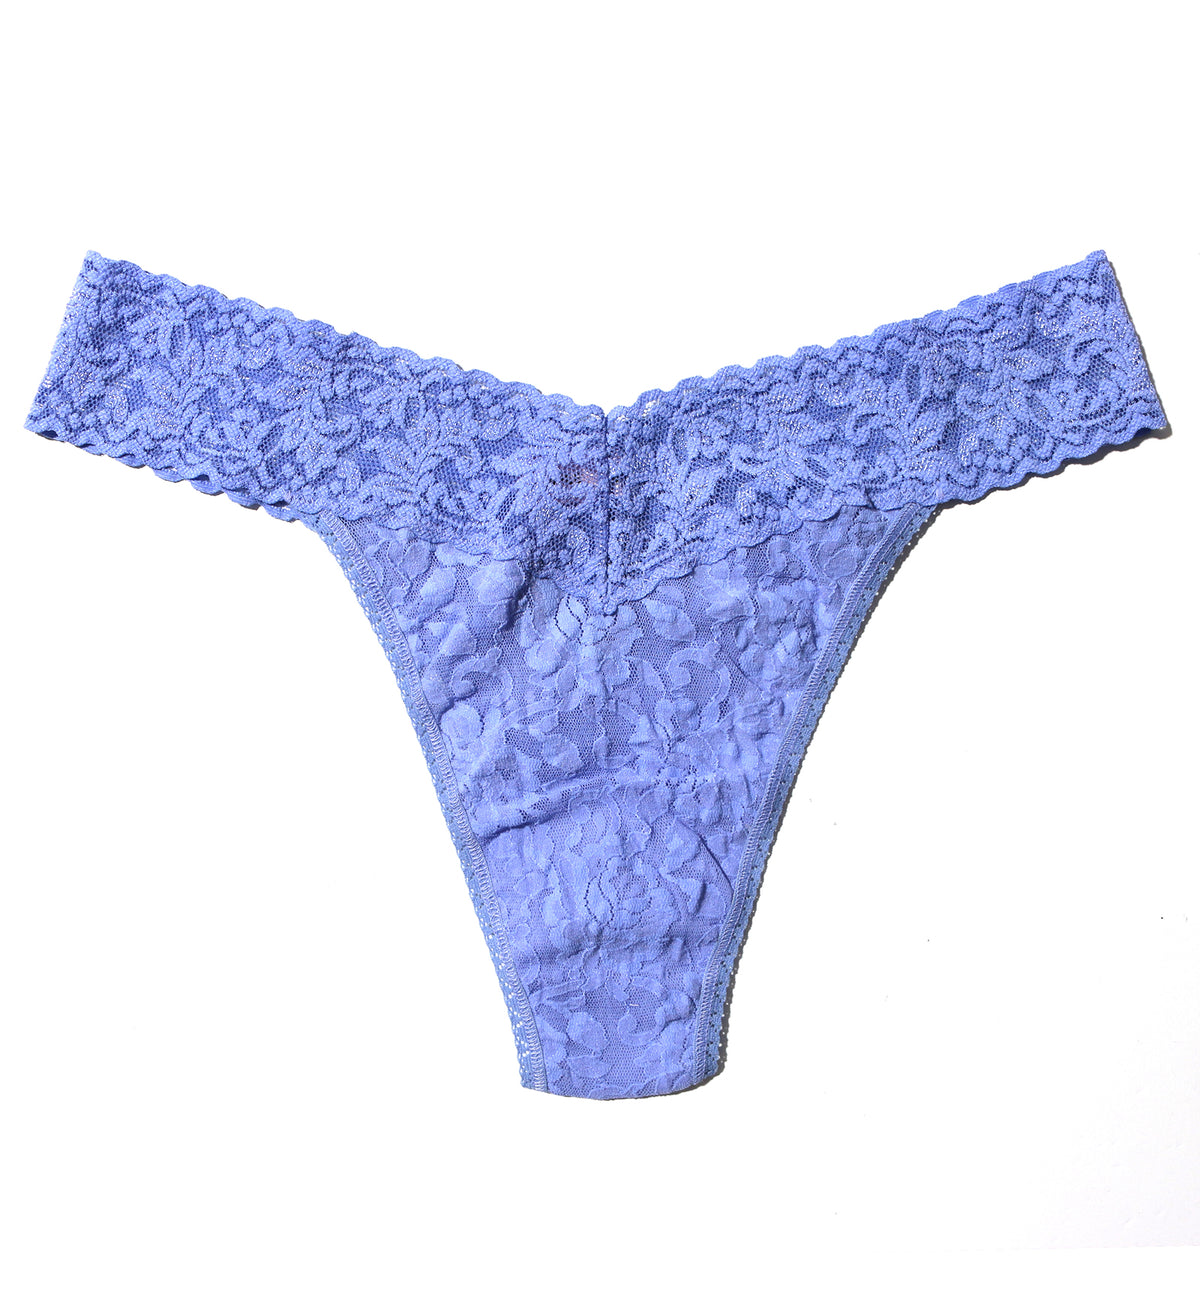 Hanky Panky Signature Lace Original Rise Thong (4811P),Cool Water Blue - Cool Water Blue,One Size